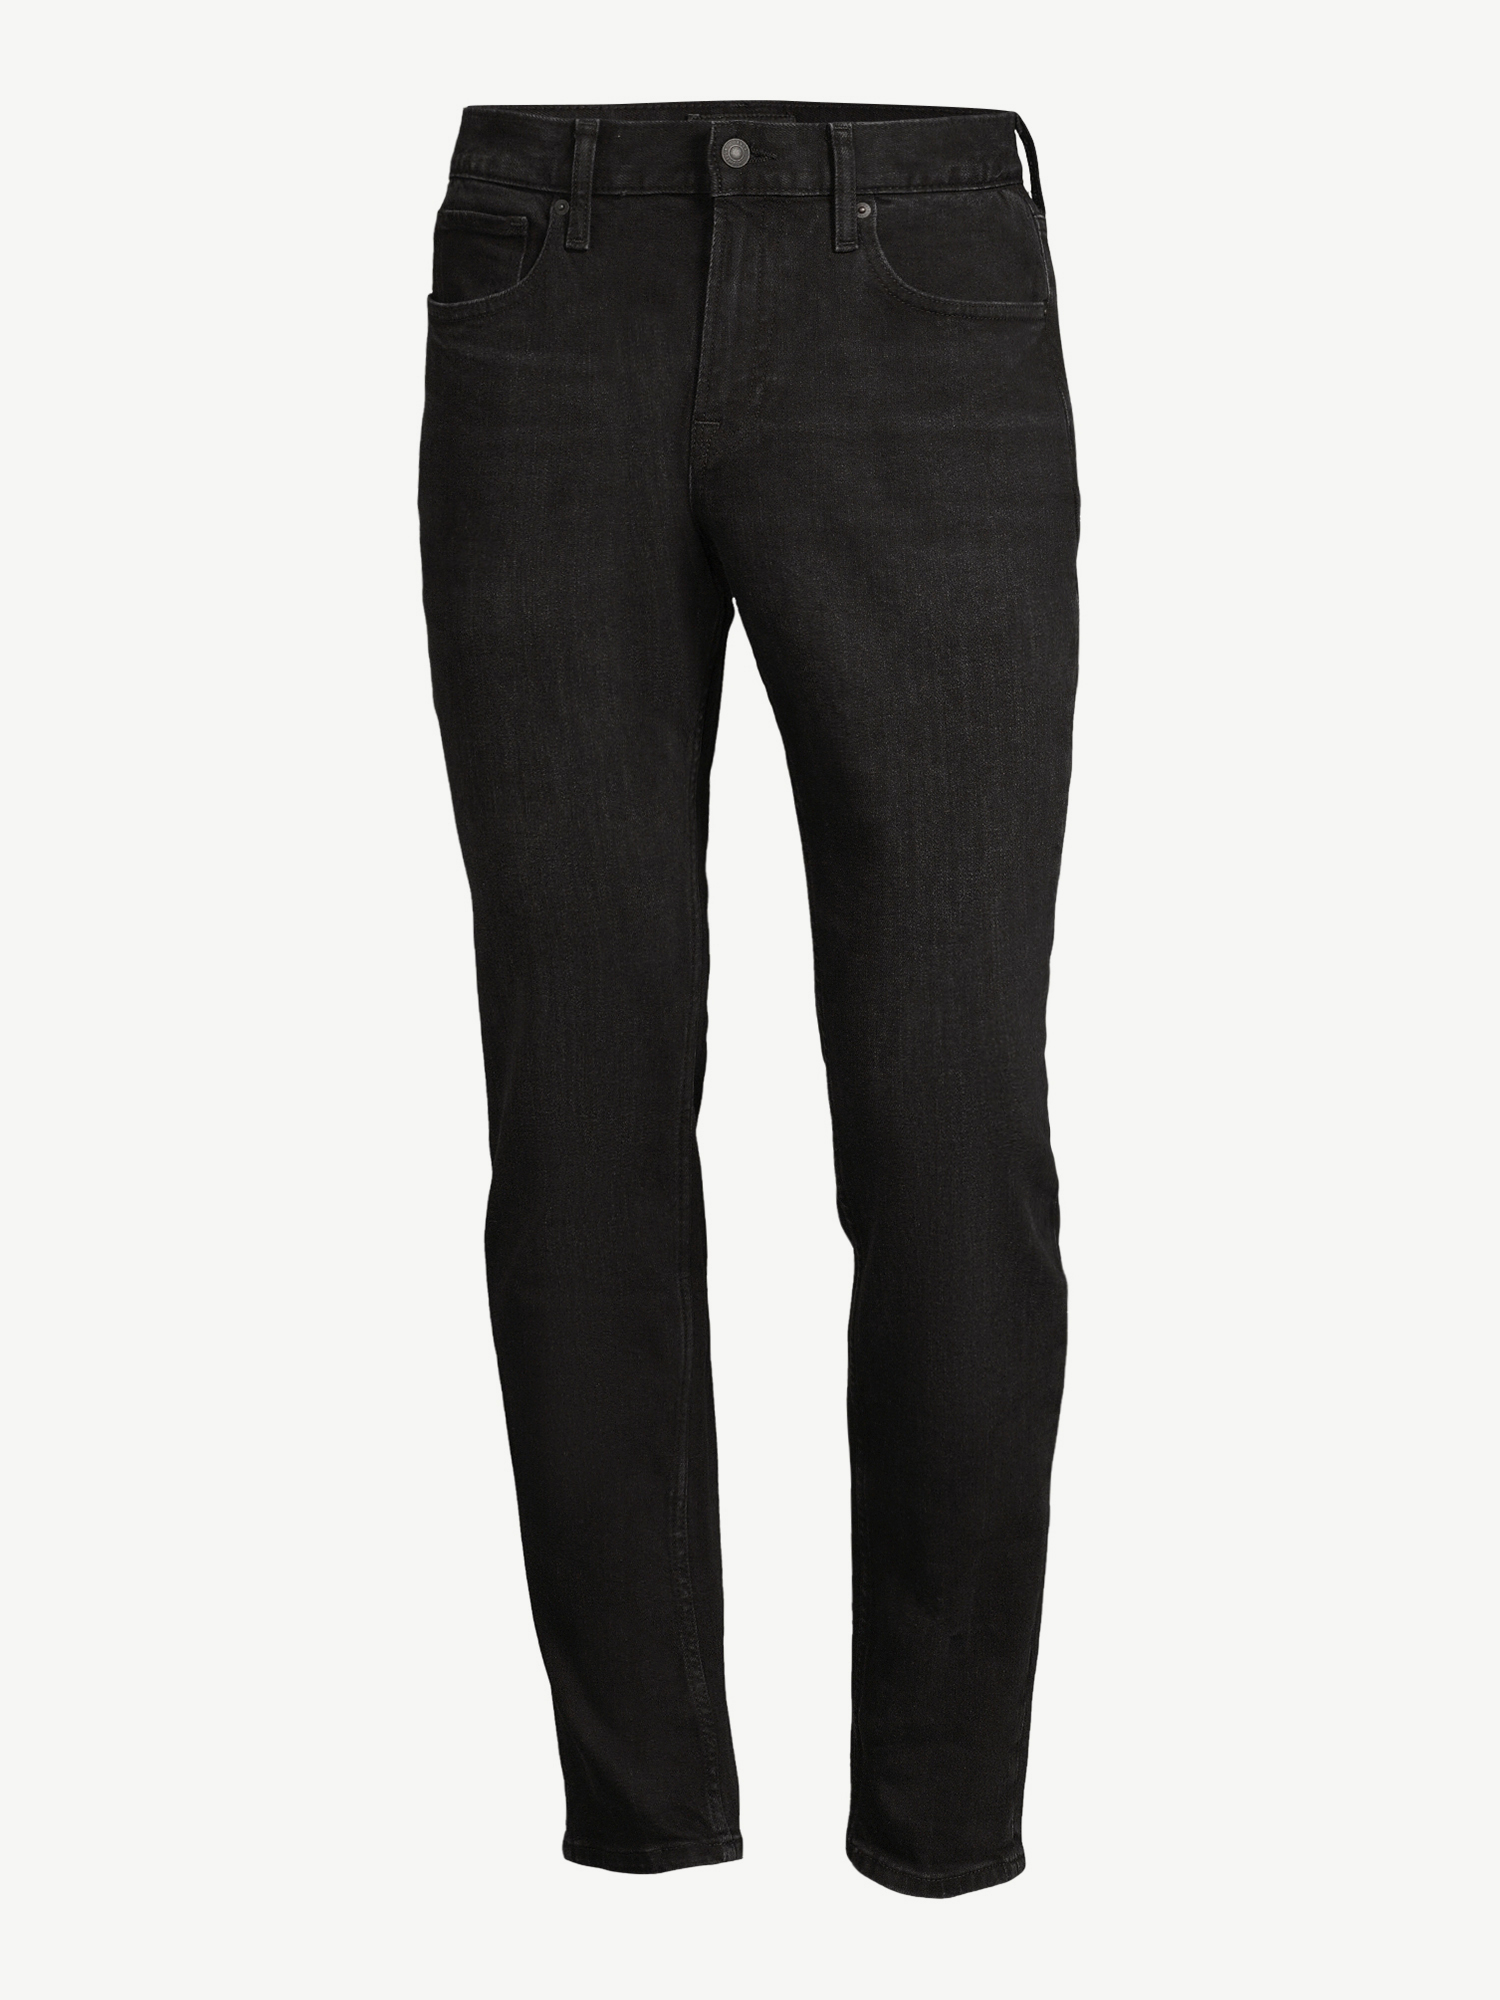 Free Assembly Men's Slim Fit Jeans - image 2 of 5